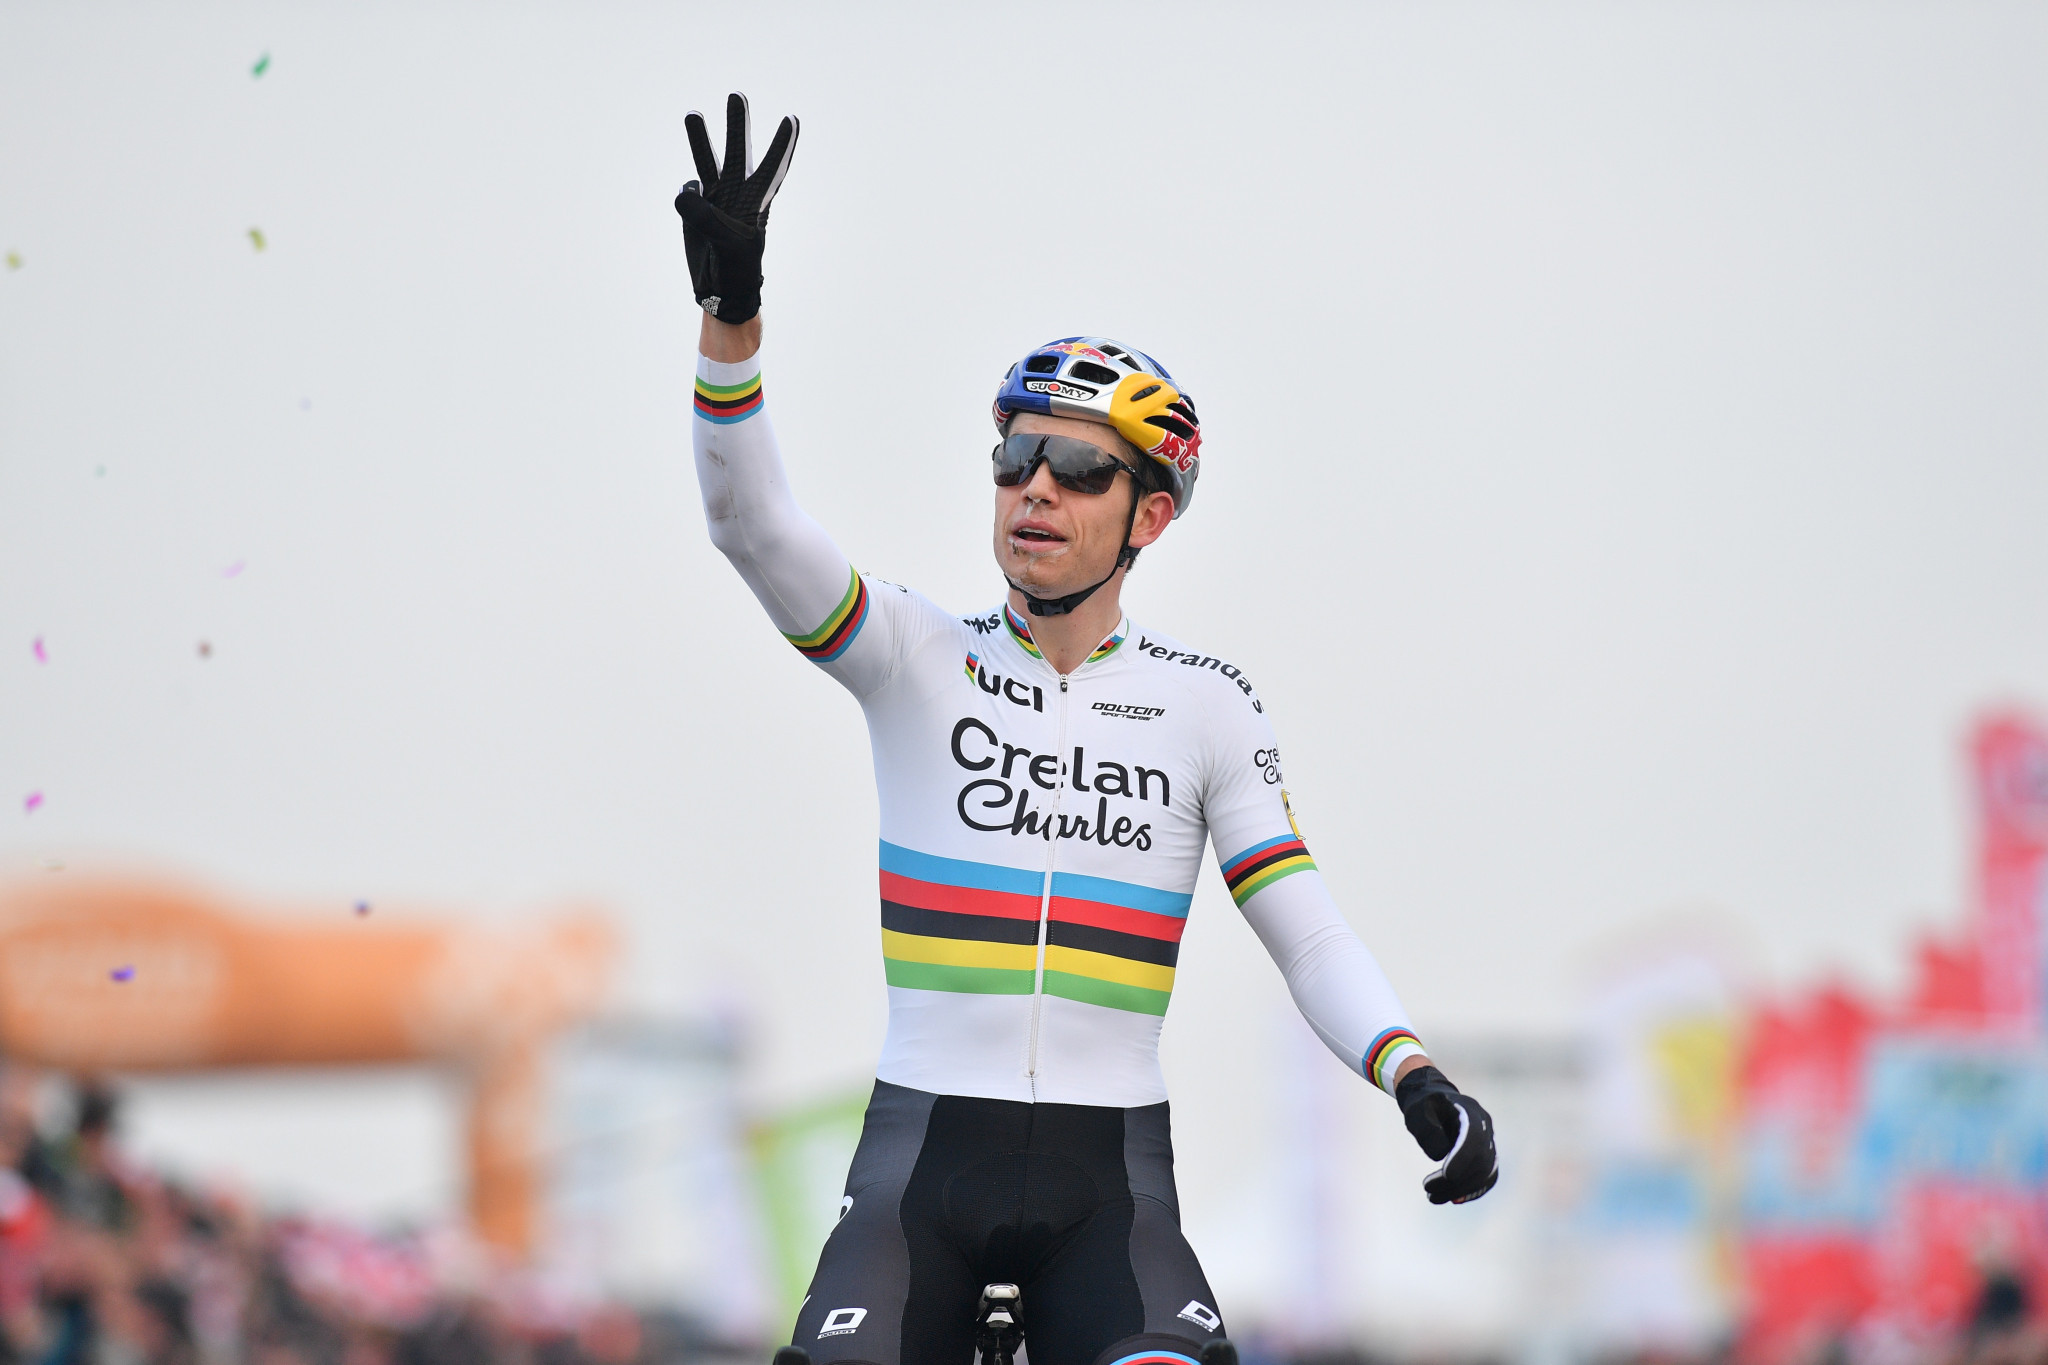 Belgium's Wout Van Aert earned his third straight world title ©Getty Images